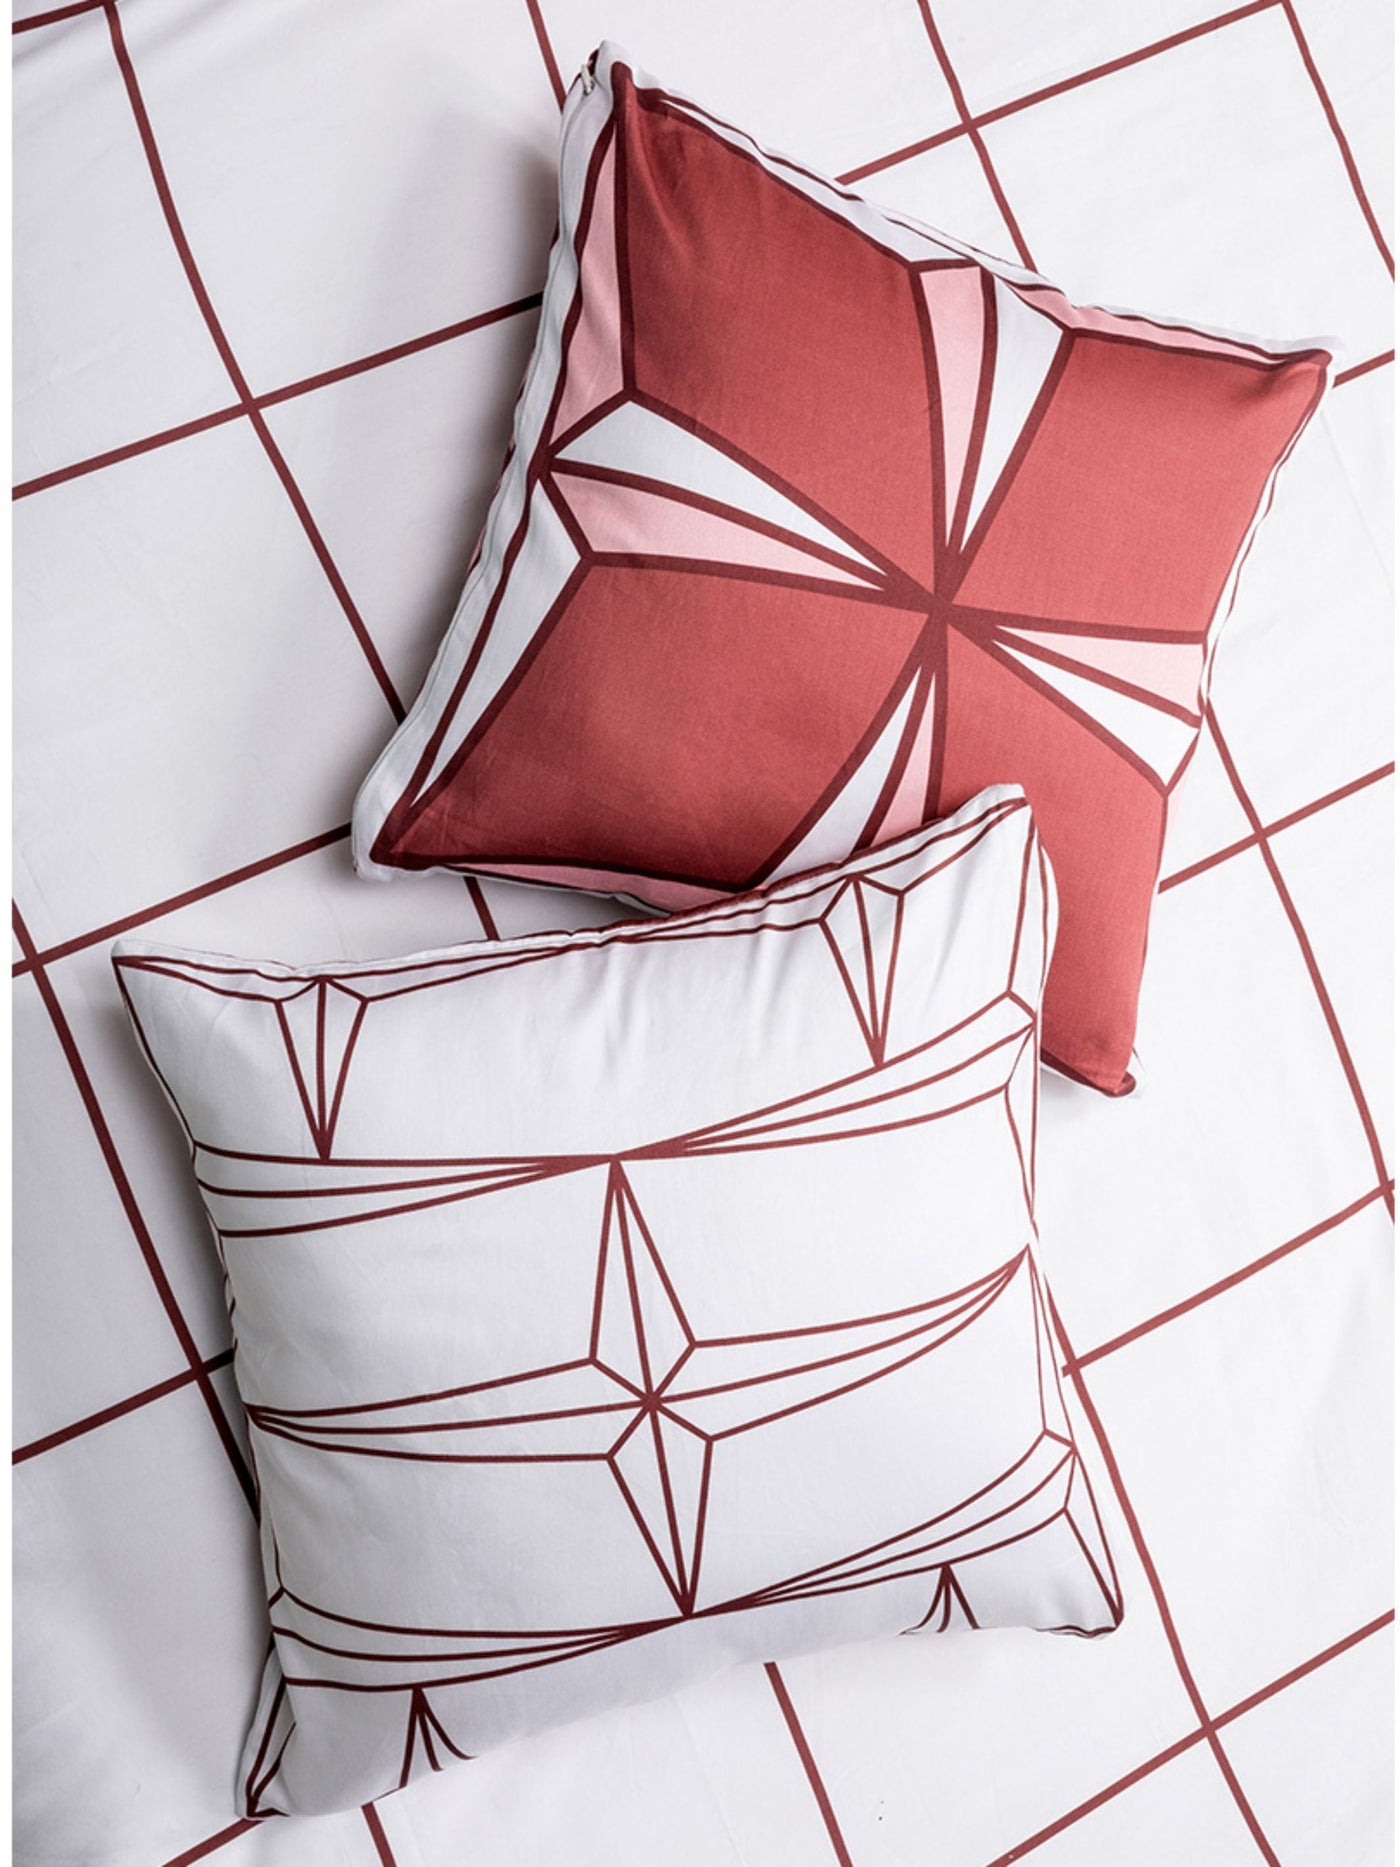 The Holy Azulejos Cushion Cover